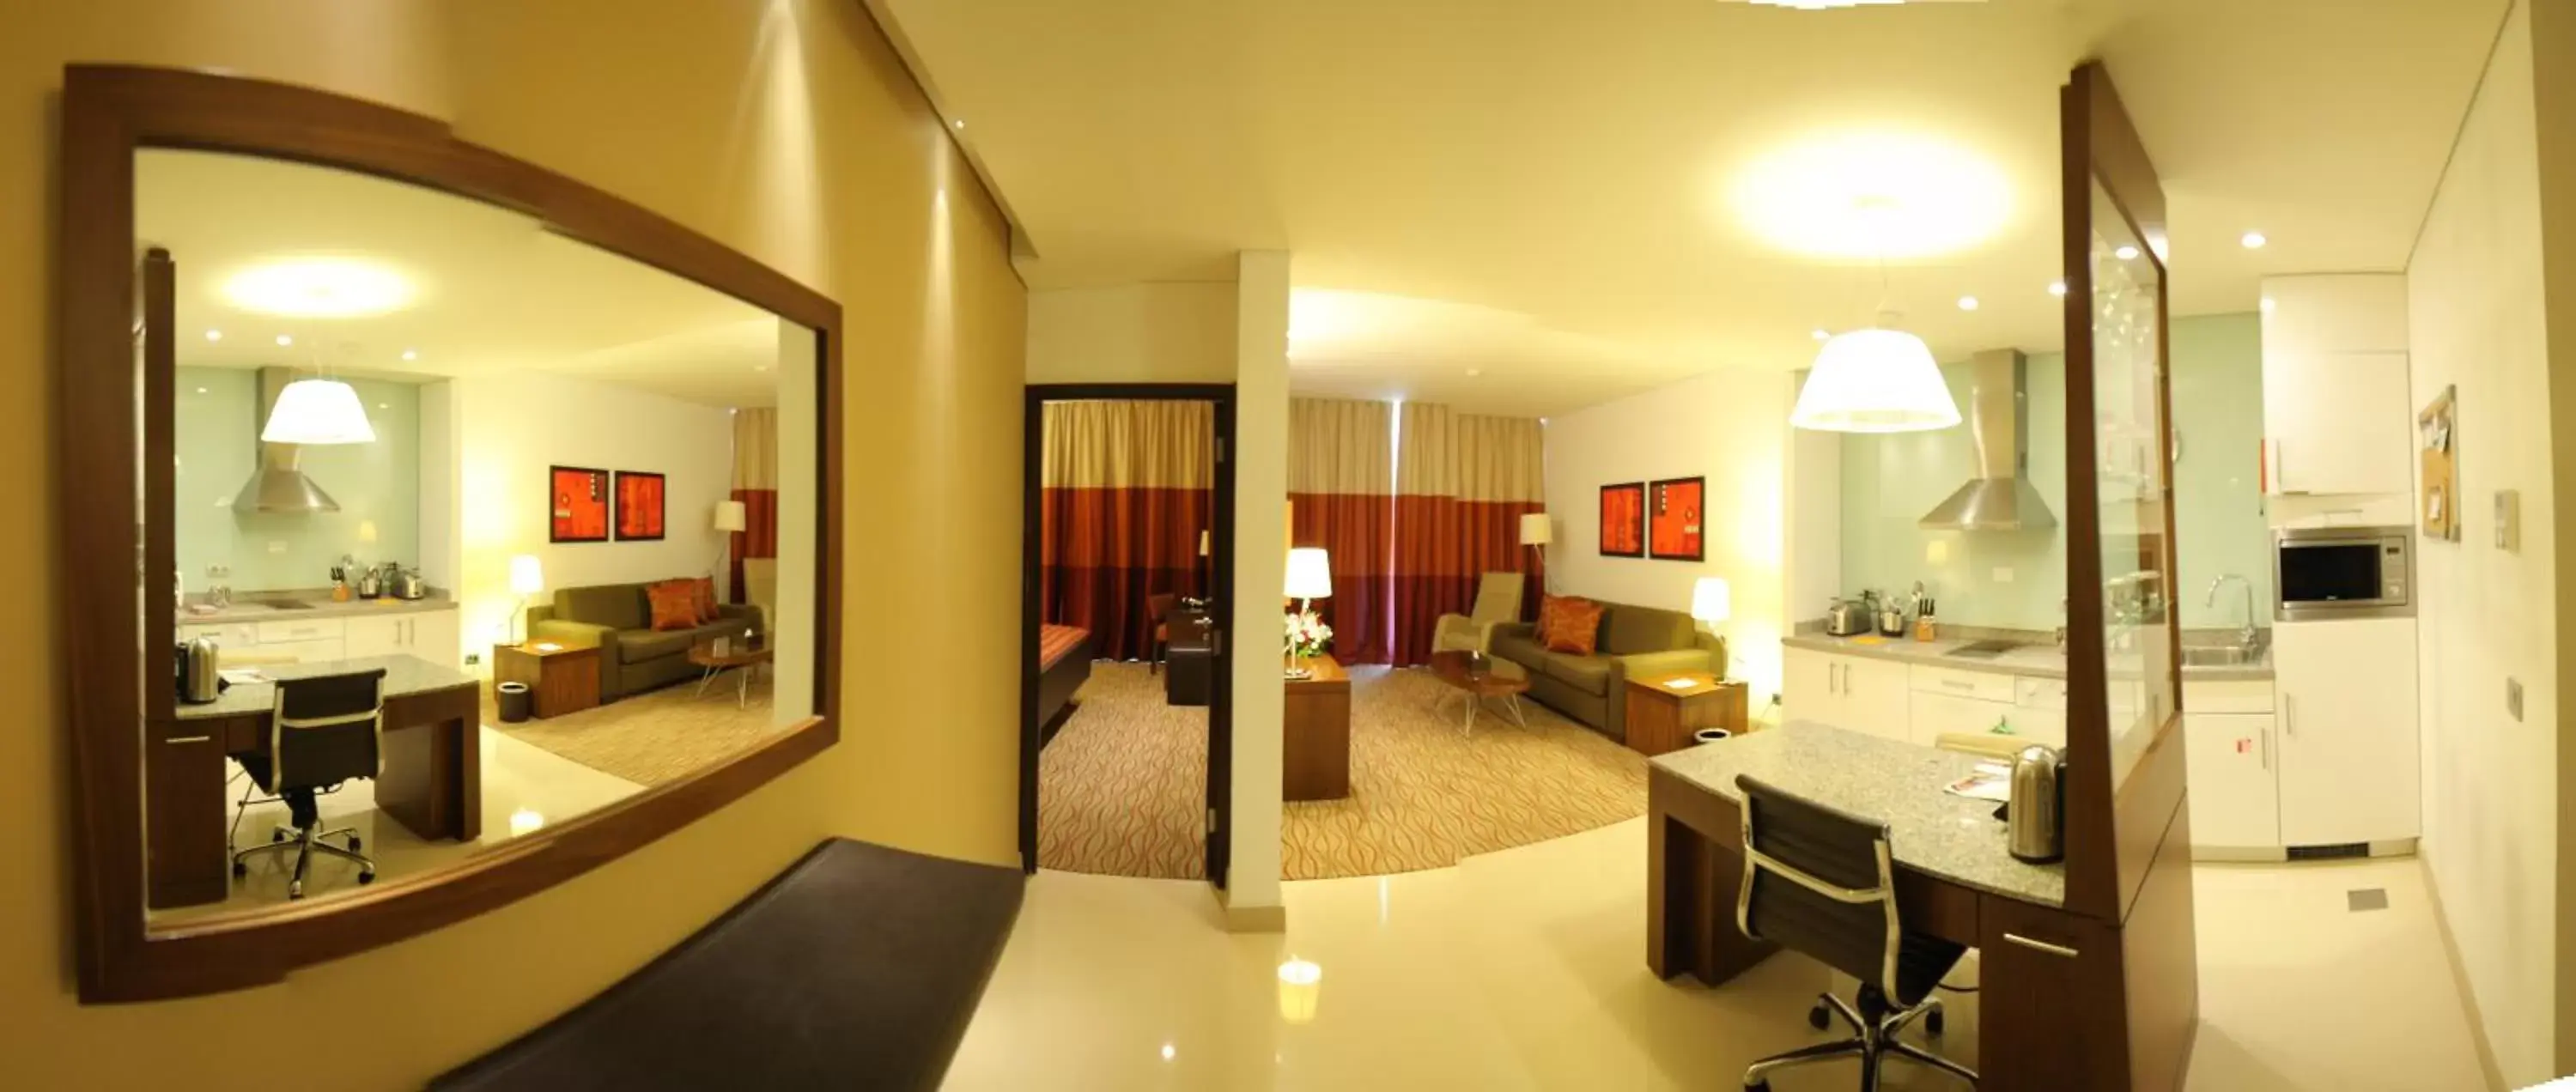 One-Bedroom Suite with Sea View Non-Smoking in Staybridge Suites Hotel, an IHG Hotel